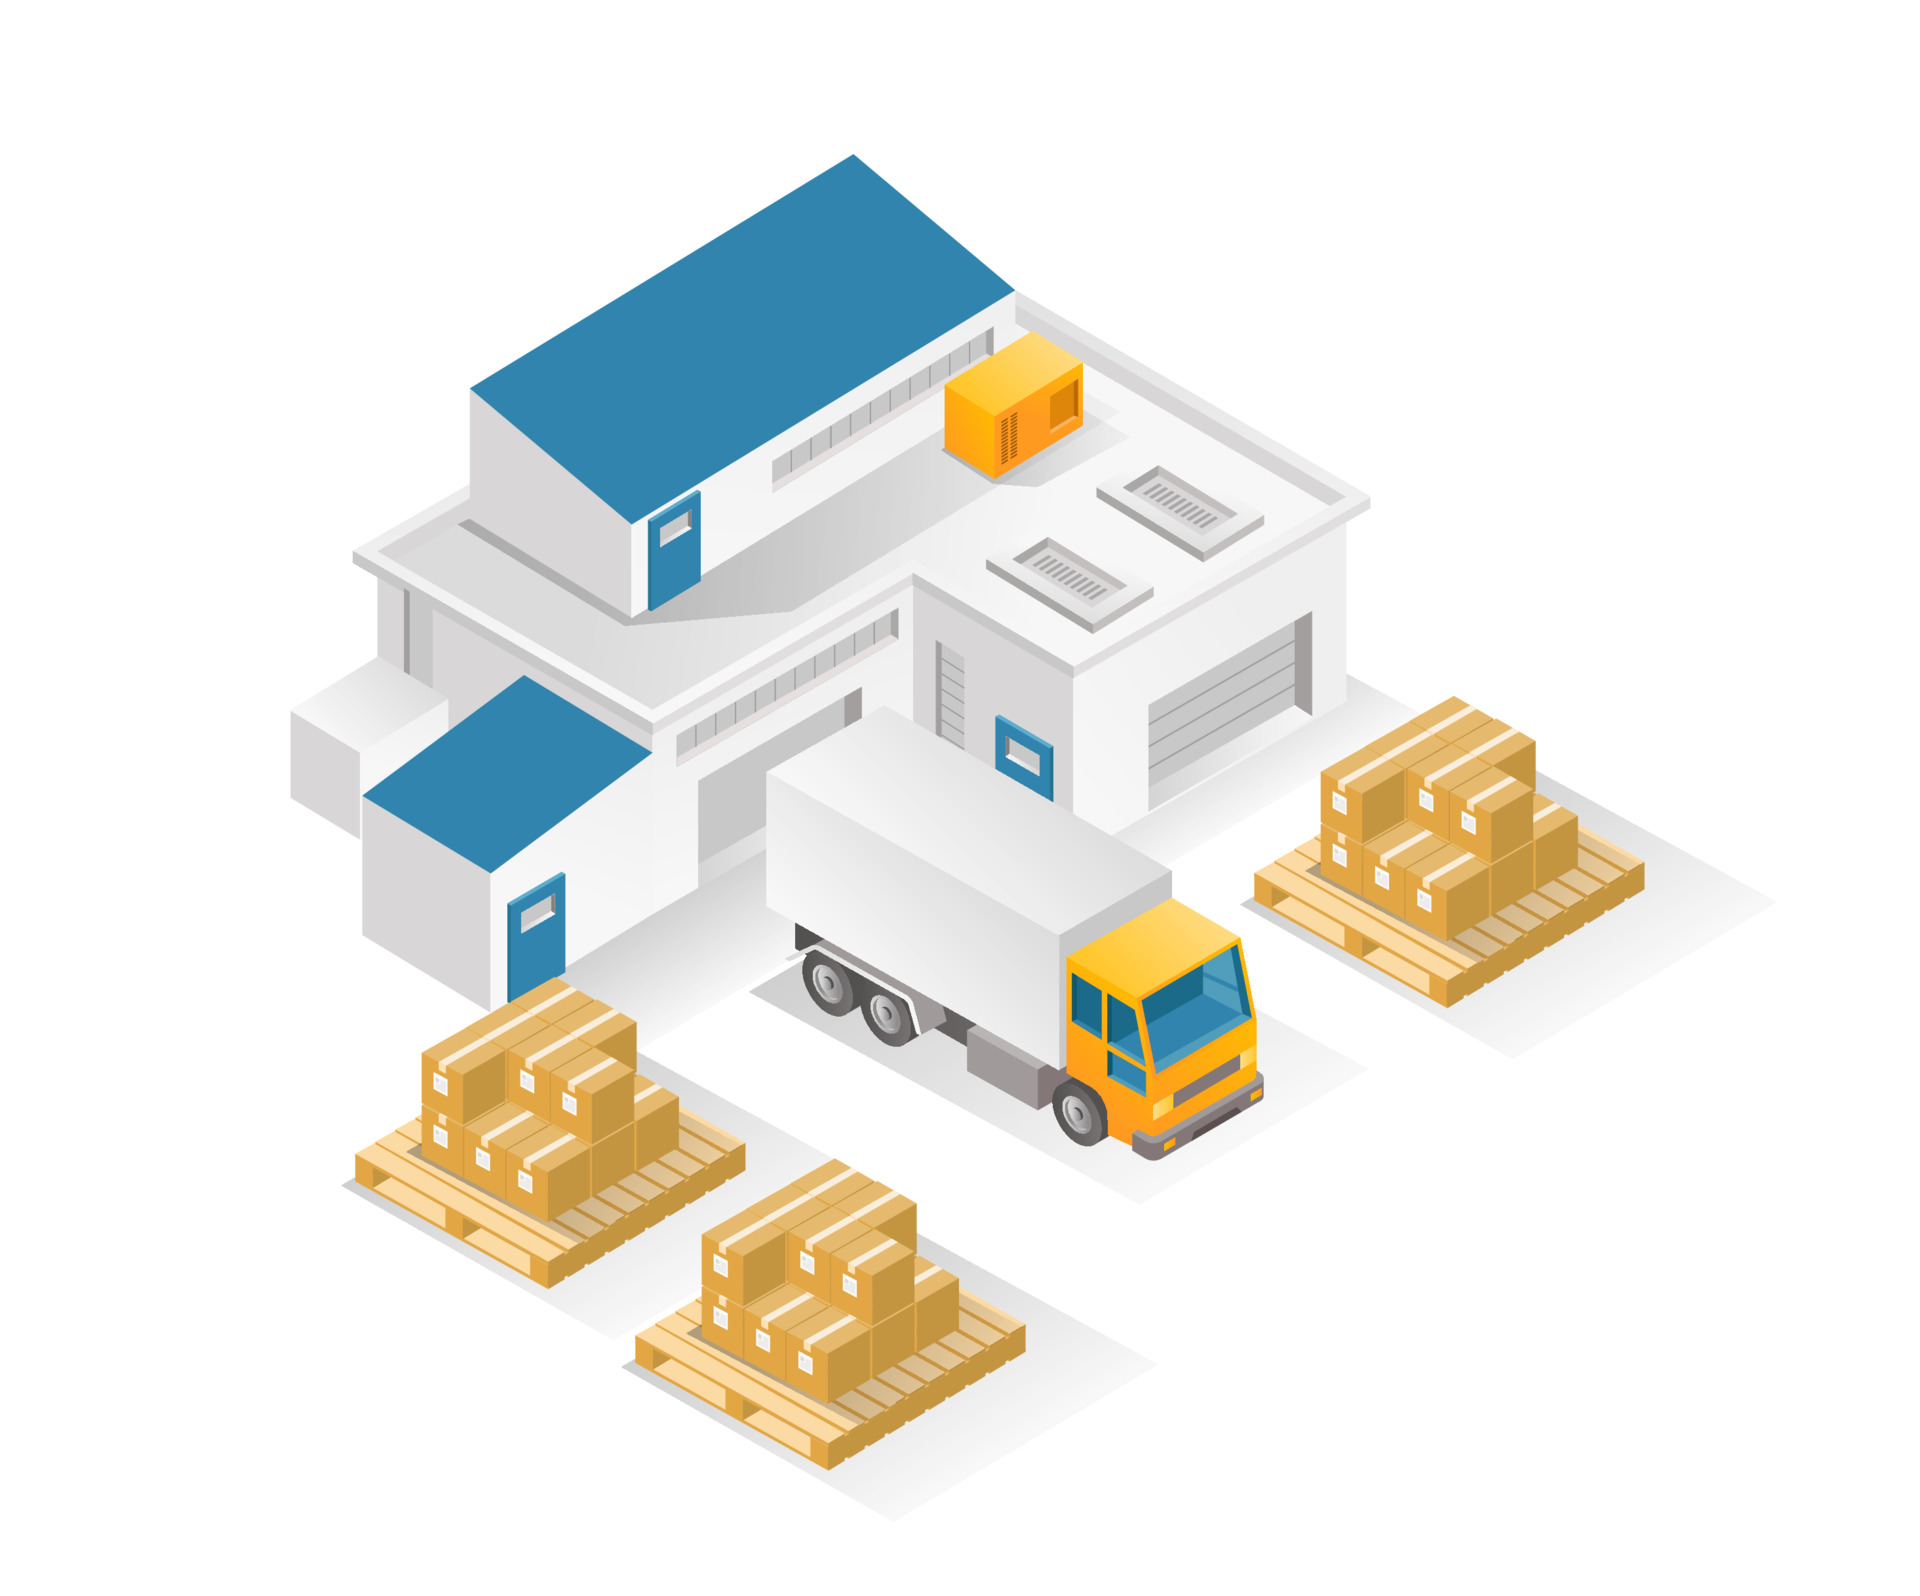 vecteezy_flat-isometric-illustration-concept-warehouse-and-delivery_7885573